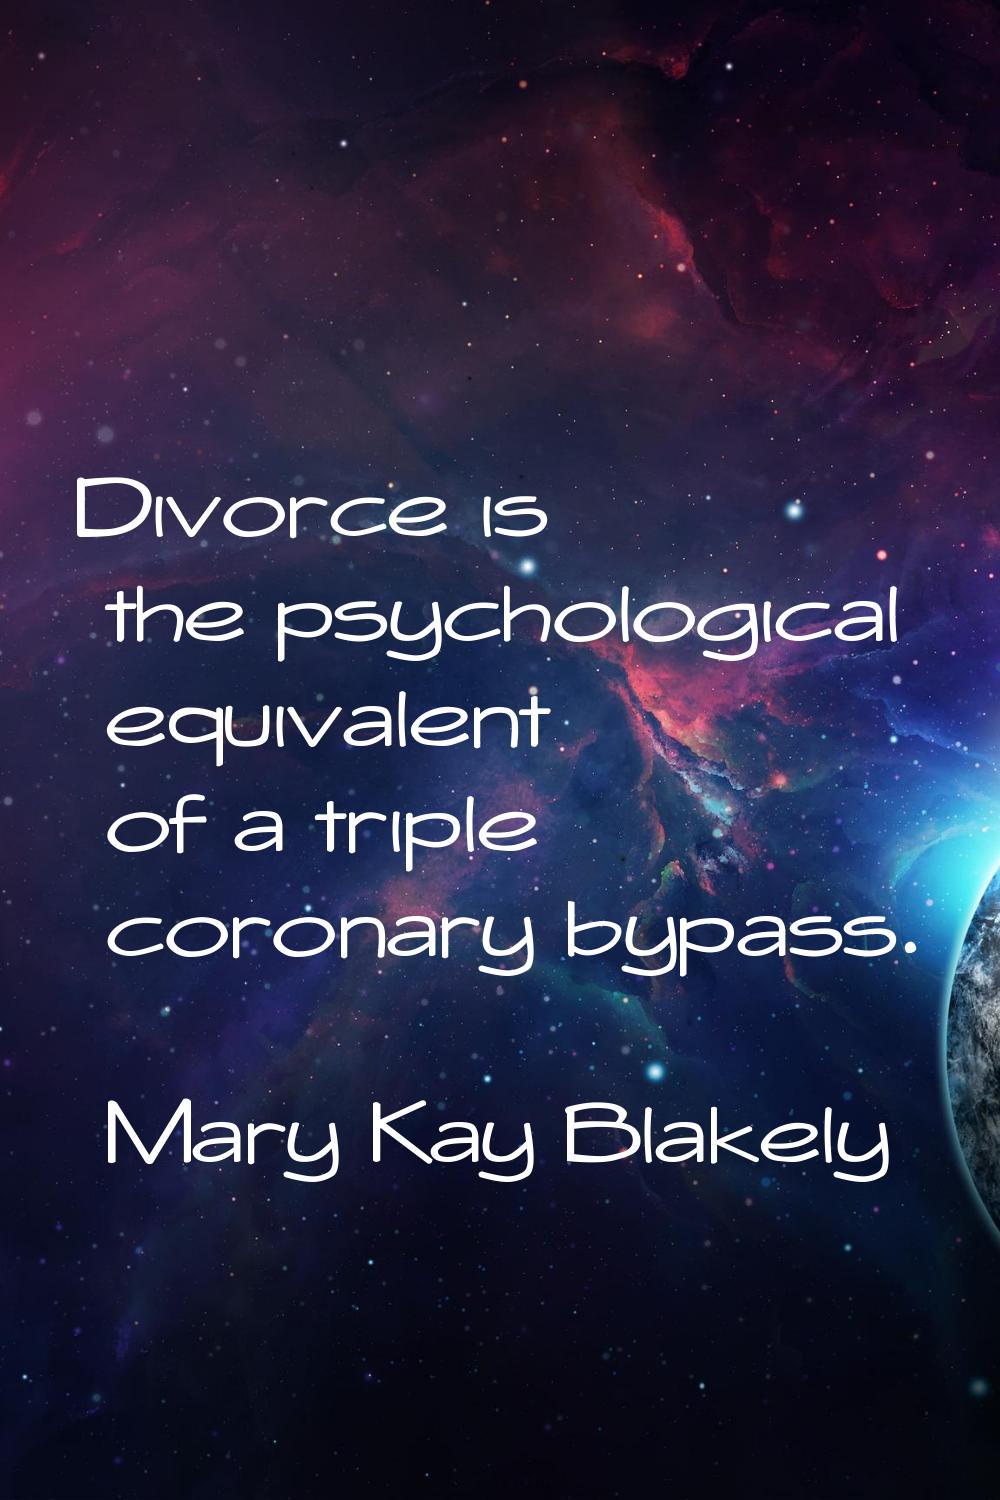 Divorce is the psychological equivalent of a triple coronary bypass.